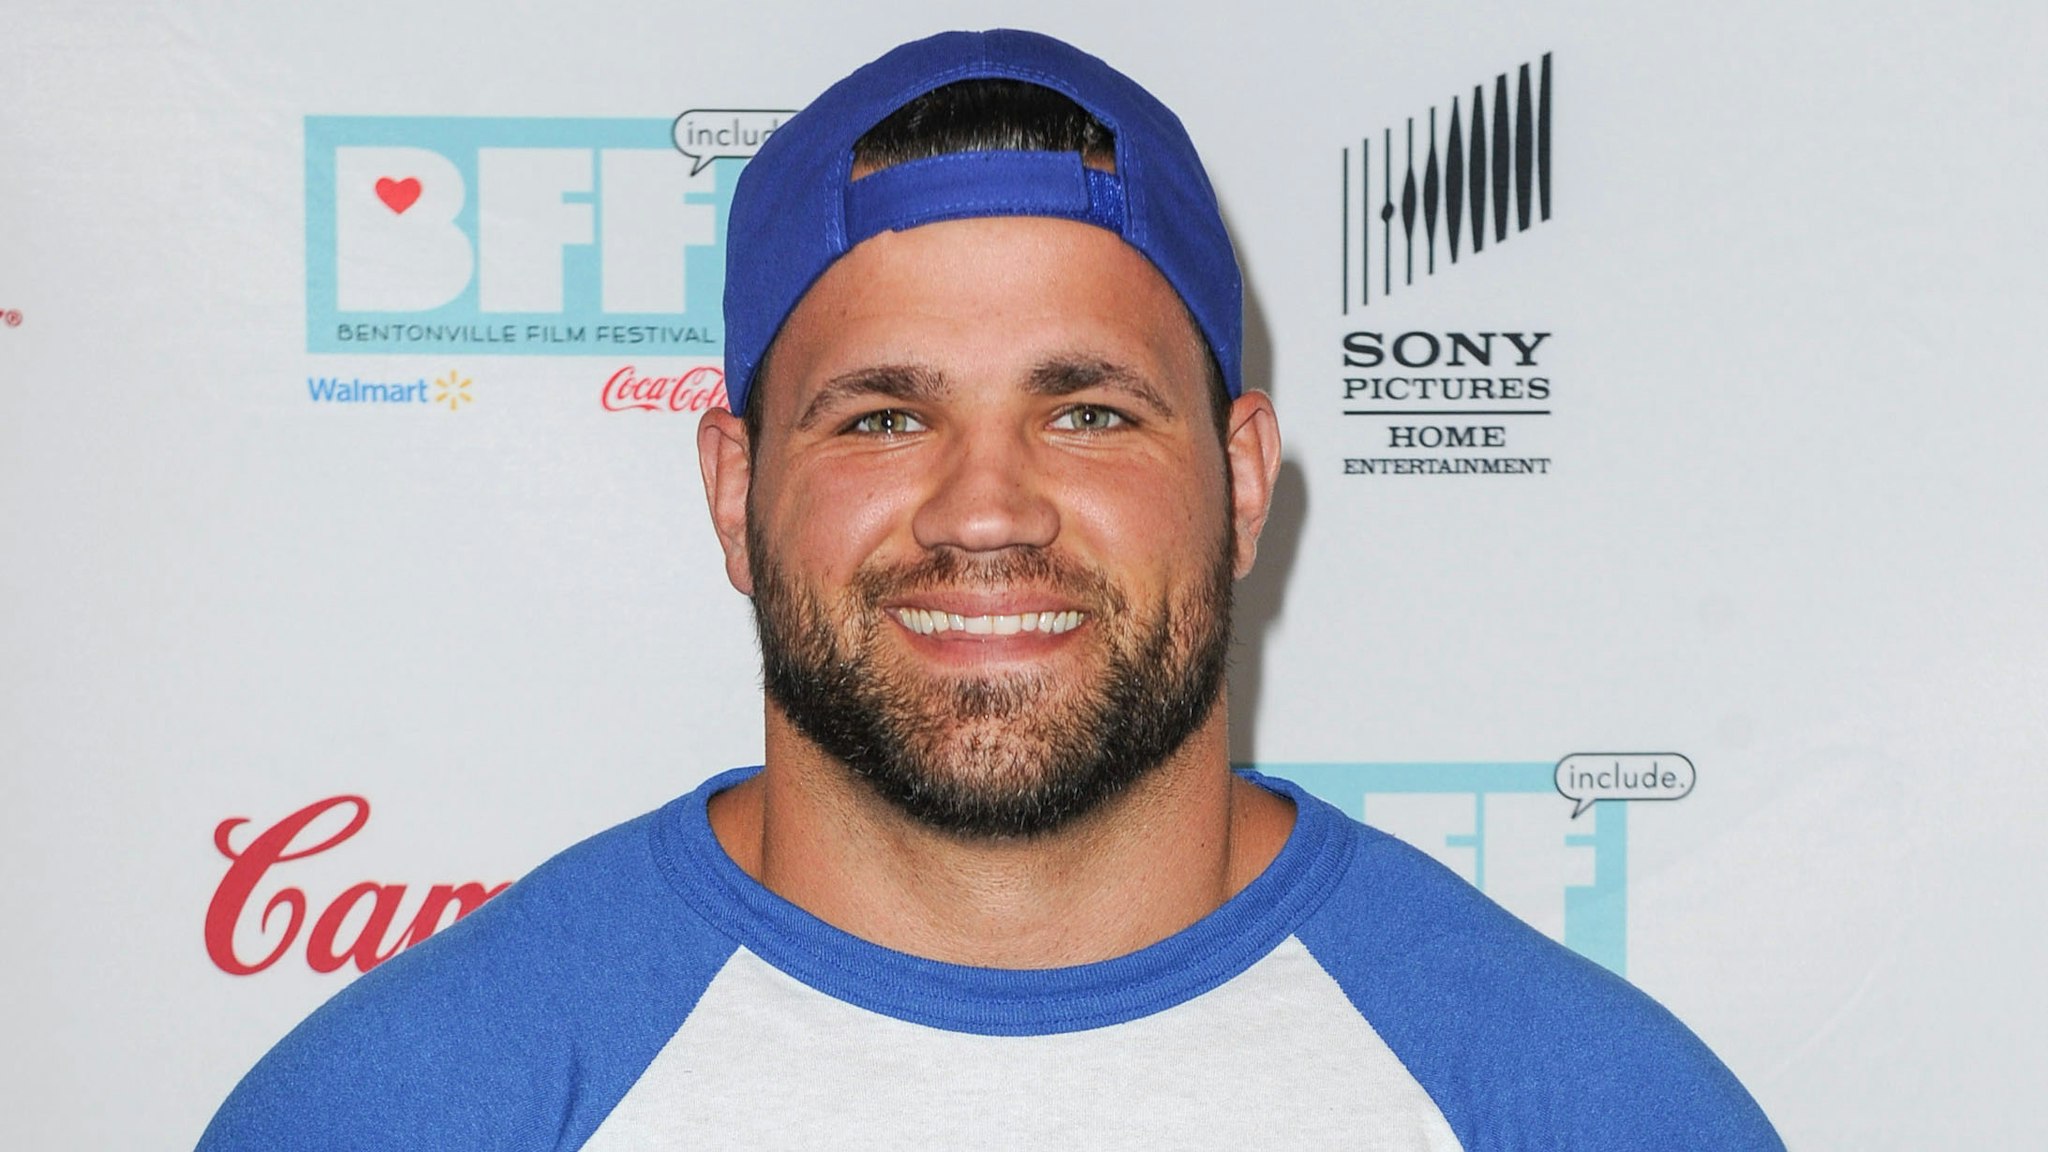 BENTONVILLE, AR - MAY 08: Peyton Hillis attends "A League Of Their Own" event at Geena Davis' 2nd Annual Bentonville Film Festival Championing Women And Diverse Voices In Media - Day 6 on May 8, 2016 in Bentonville, Arkansas.